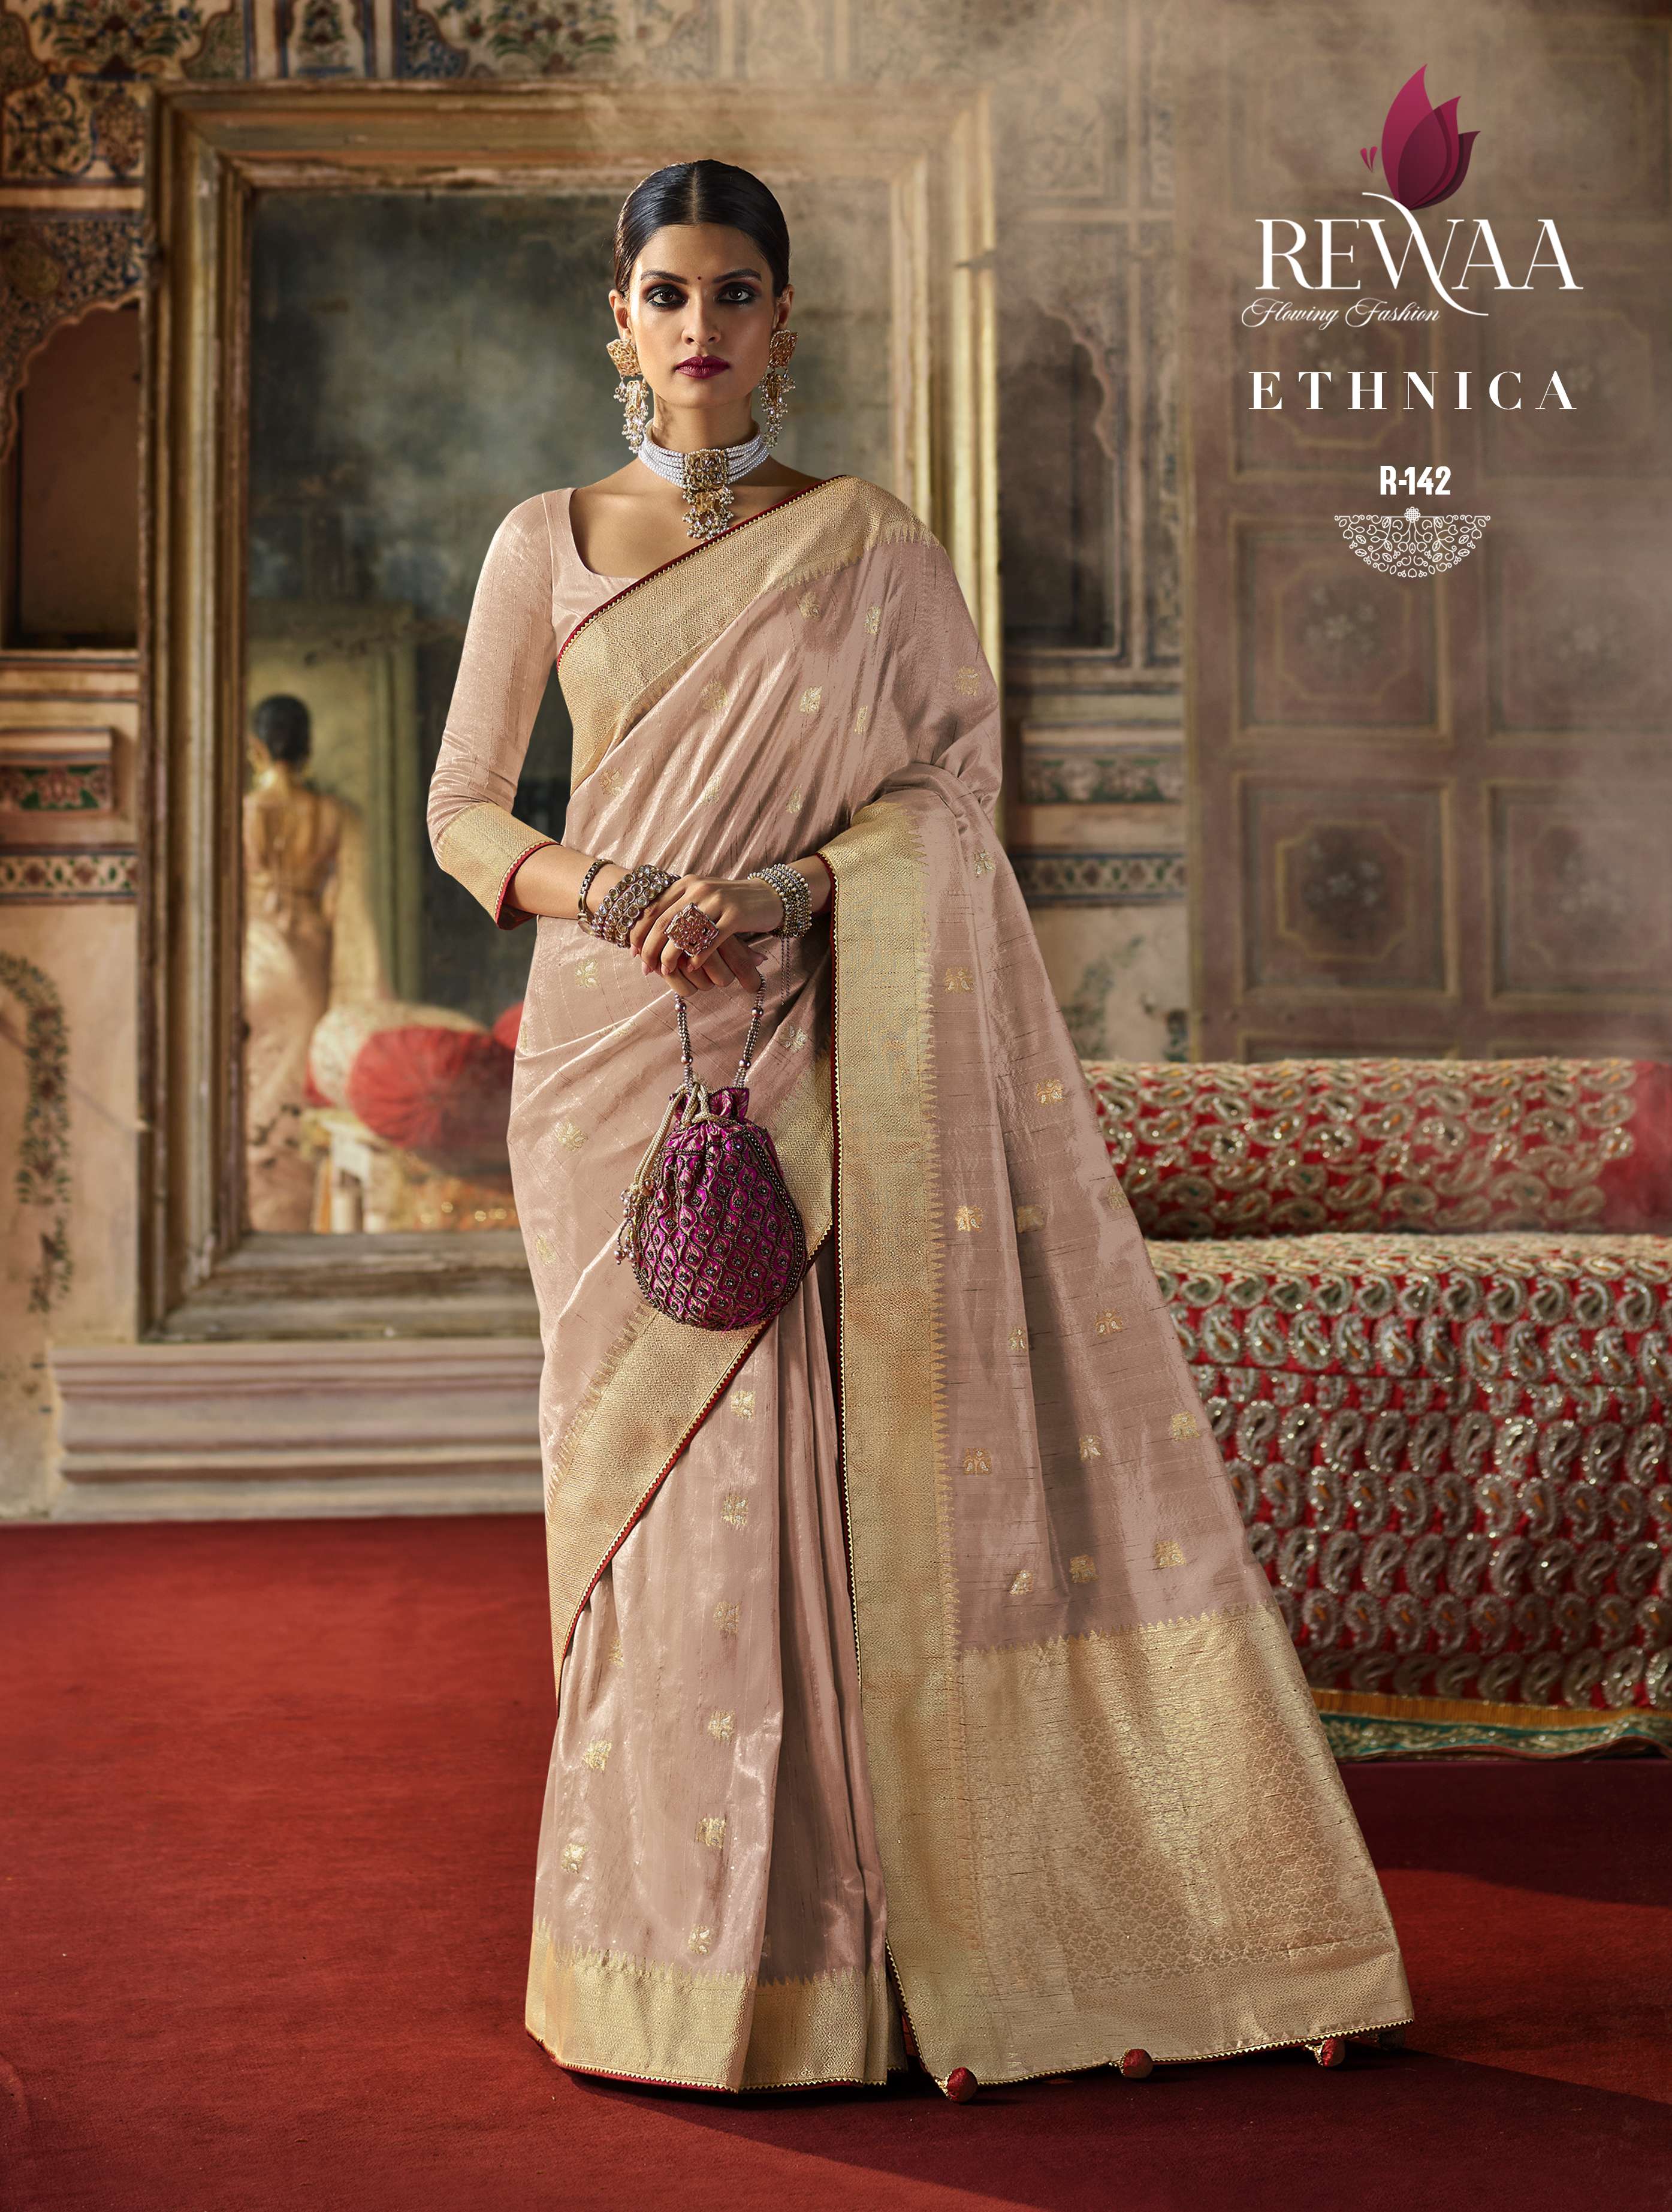 REEWA ETHNICA CROW CHAT SILK SAREE LATEST COLLECTION CATLOGUE 